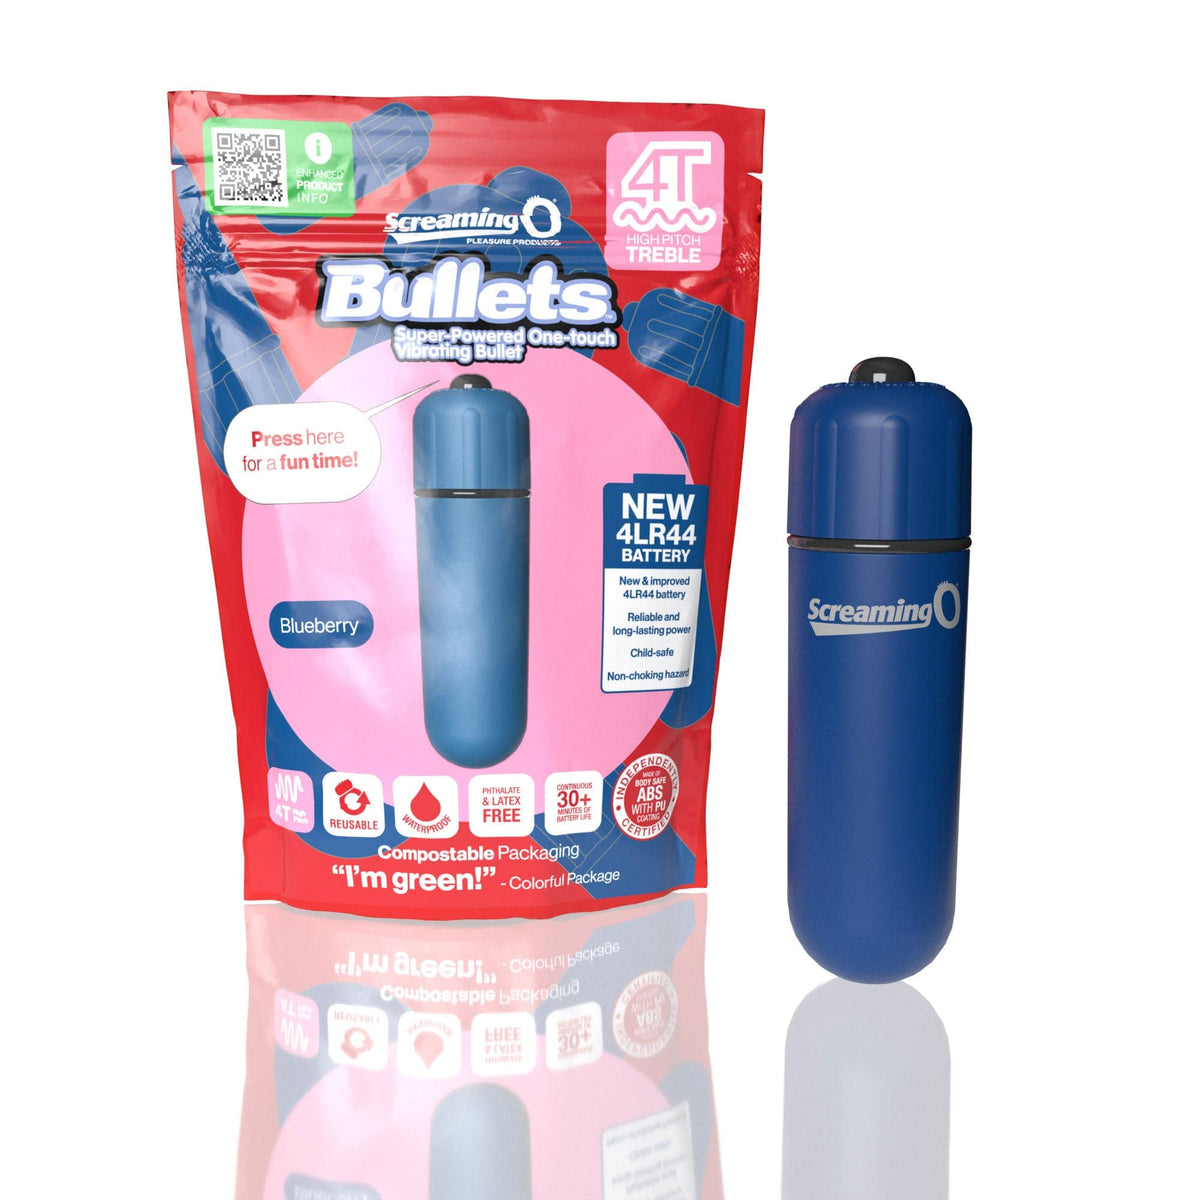 screaming o 4t bullet super powered one touch vibrating bullet blueberry